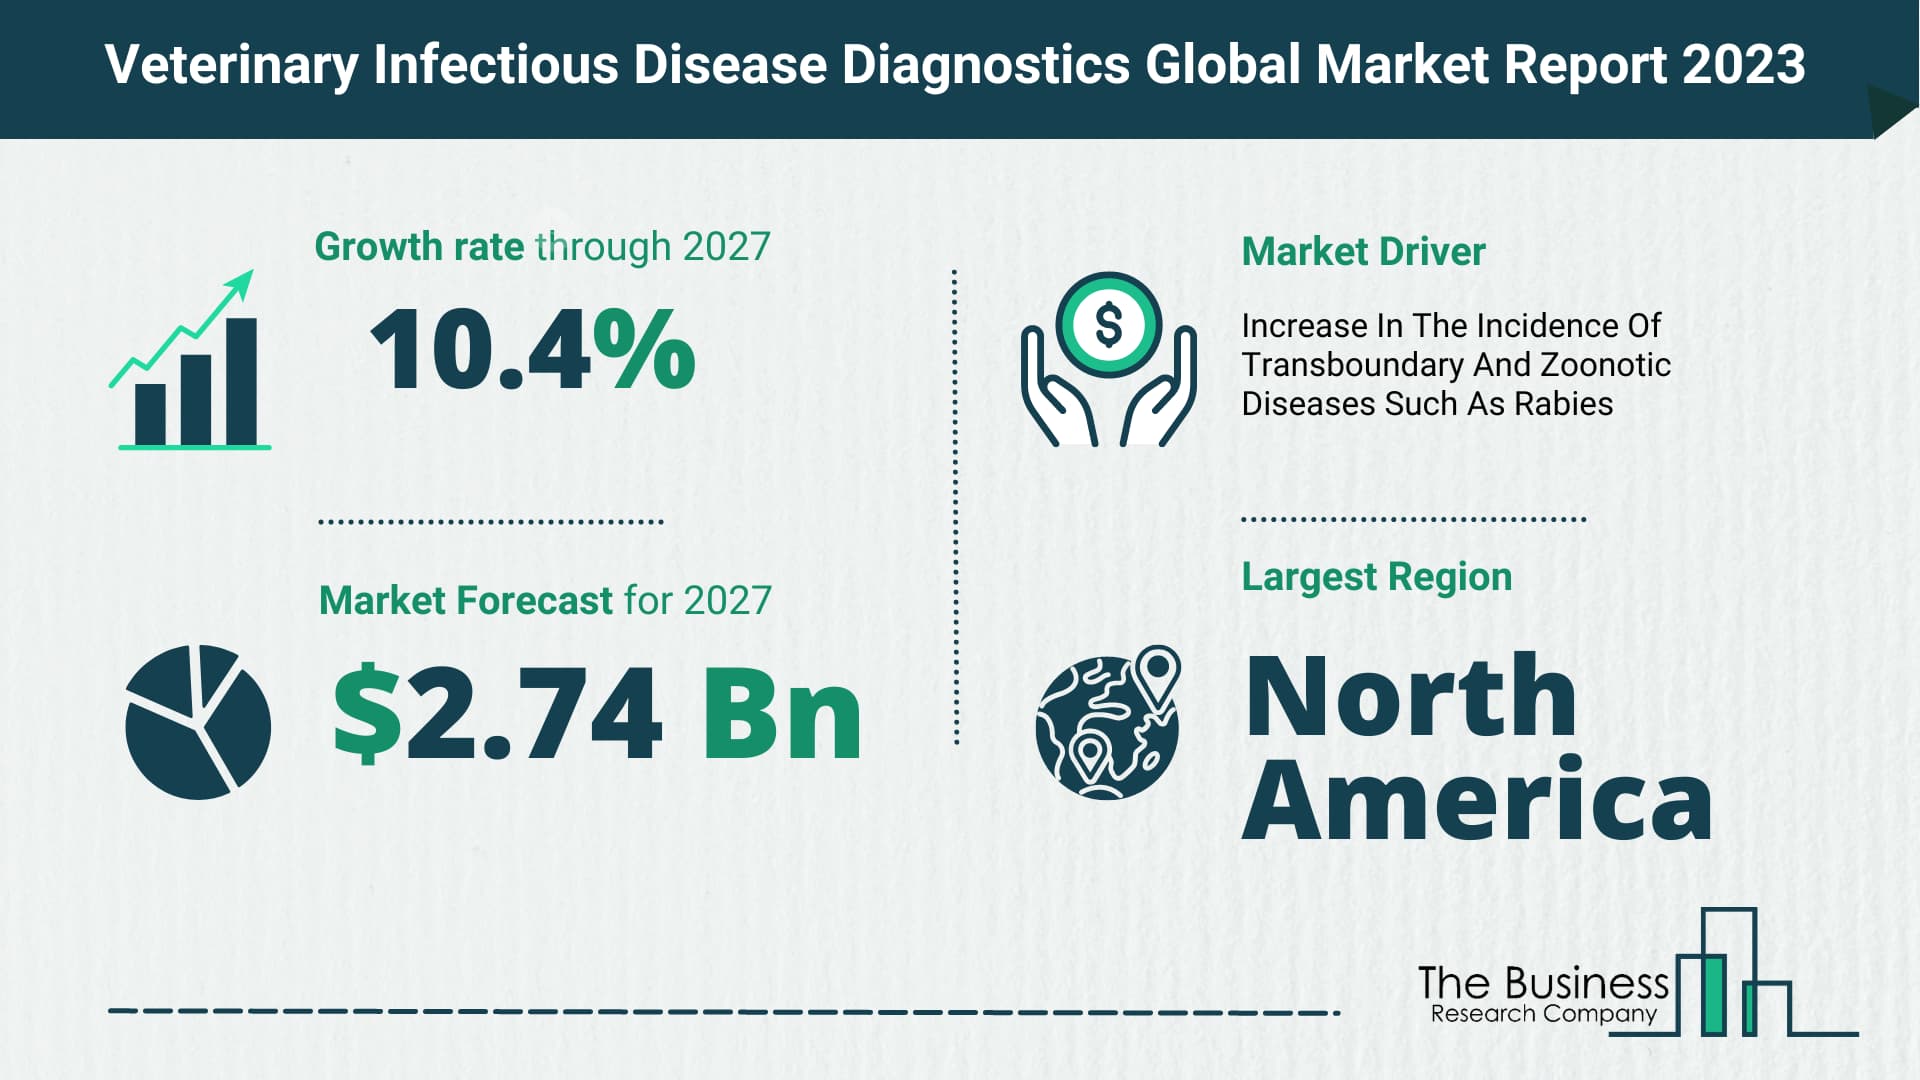 Global Veterinary Infectious Disease Diagnostics Market Opportunities And Strategies 2023